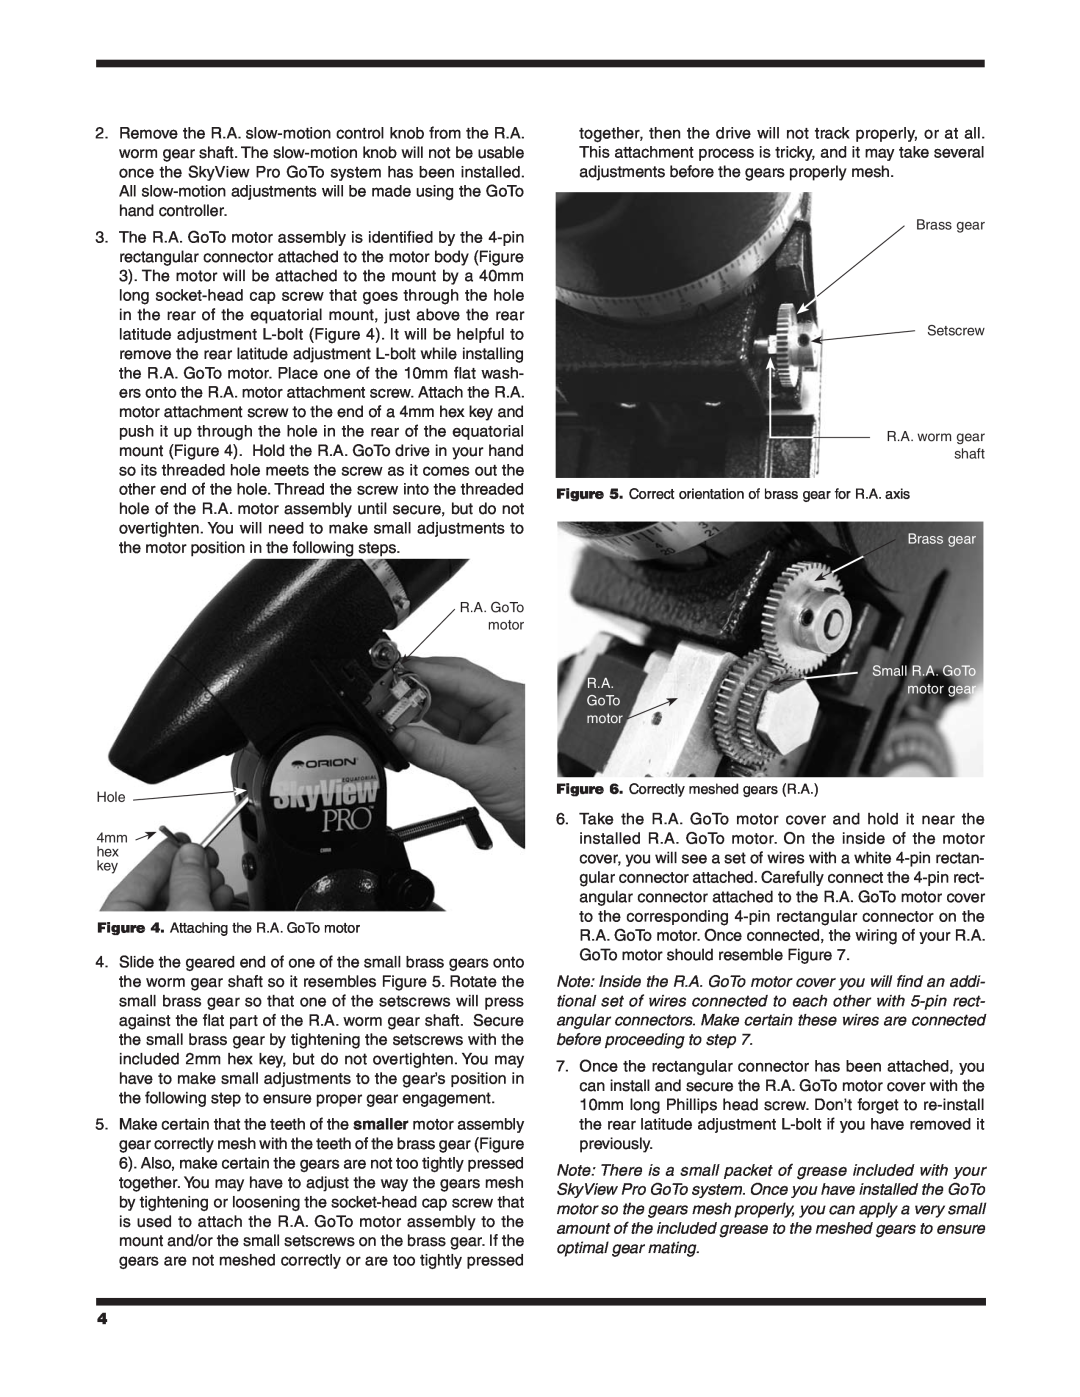 Orion 7817 instruction manual R.A. GoTo motor 